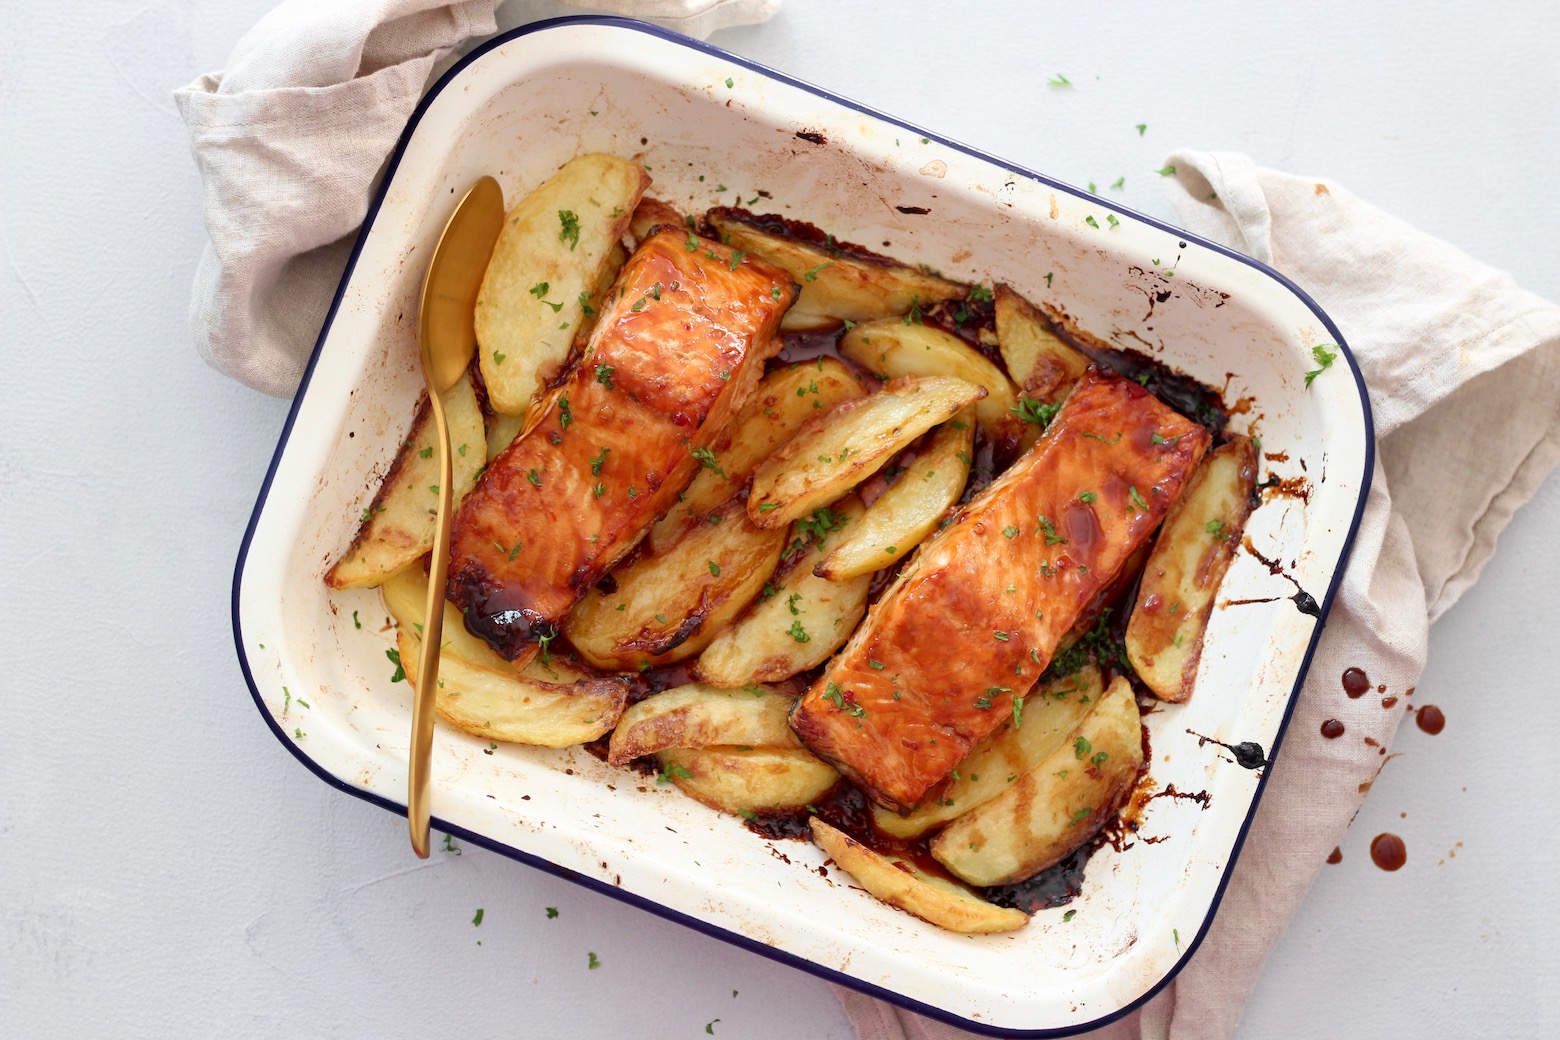 Top down image of Asian glazed salmon on a bed of crispy wedges in a baking tray with a serving spoon and tea towel